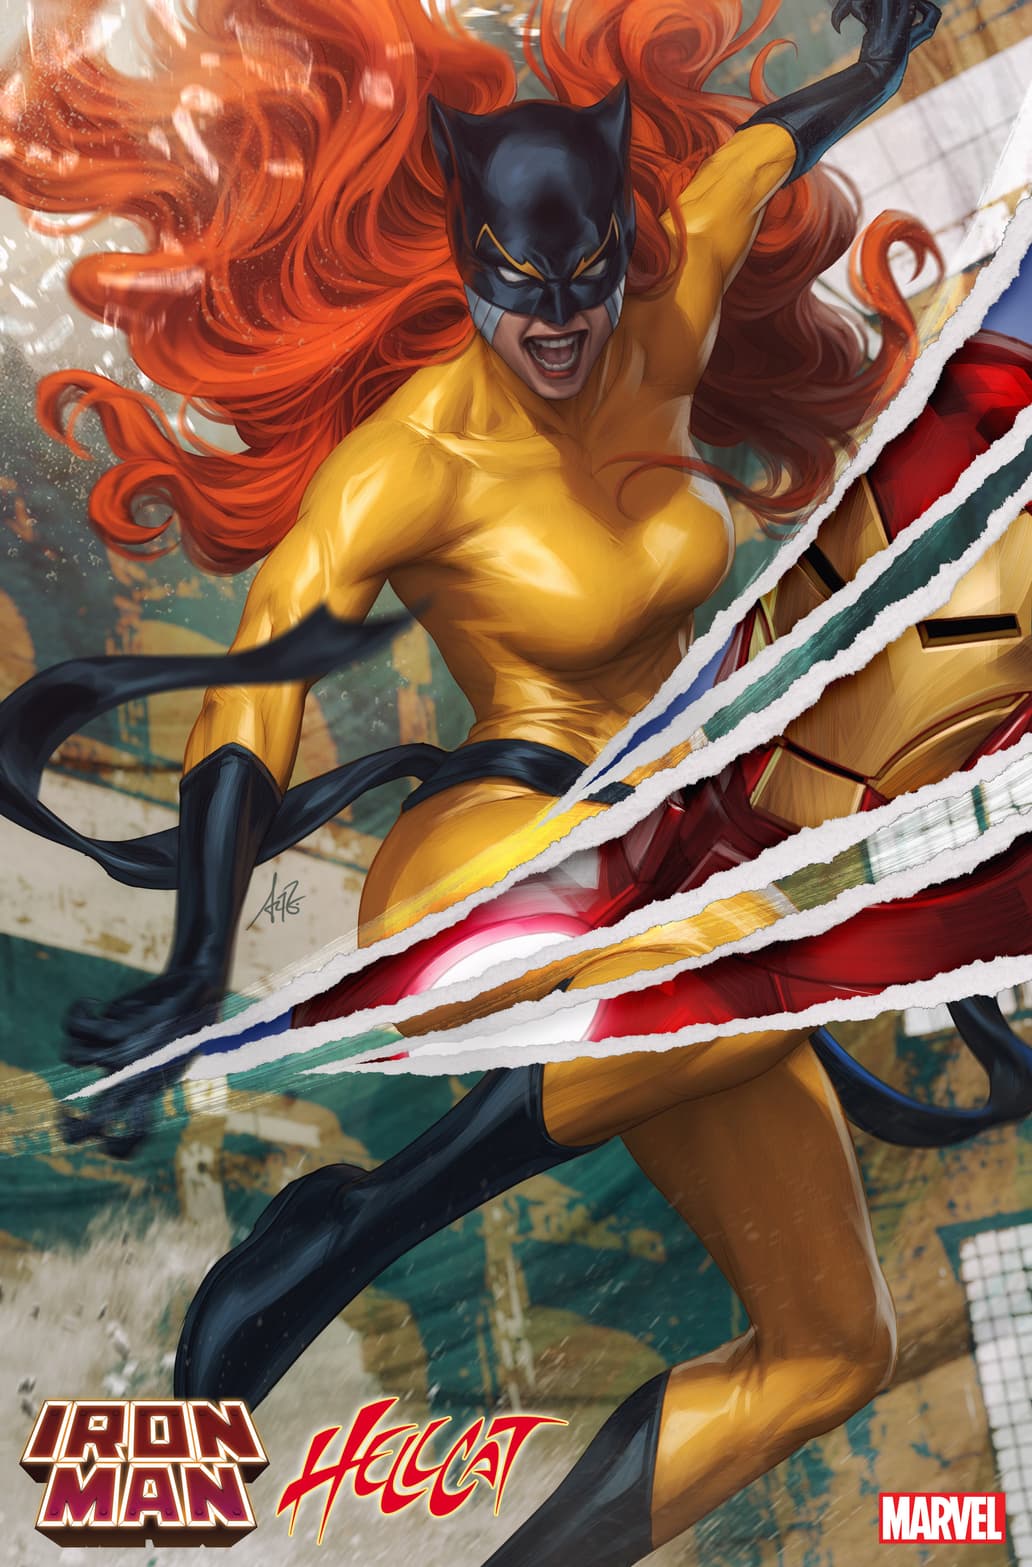 Iron Man/Hellcat Annual #1 variant cover by Artgerm